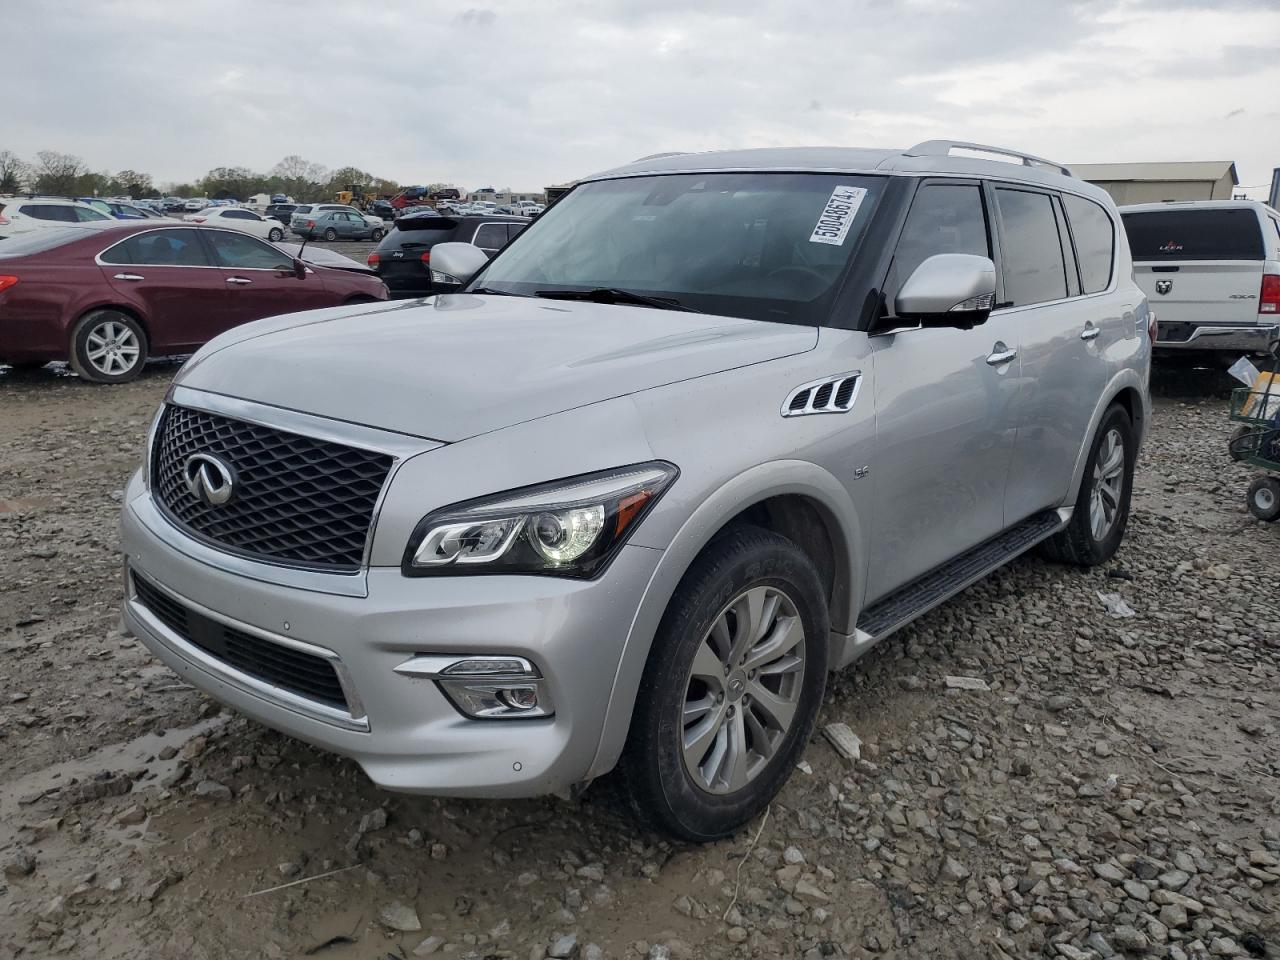 vin: JN8AZ2NC7H9430614 JN8AZ2NC7H9430614 2017 infiniti qx80 5600 for Sale in 37354 6763, Tn - Knoxville, Madisonville, Tennessee, USA